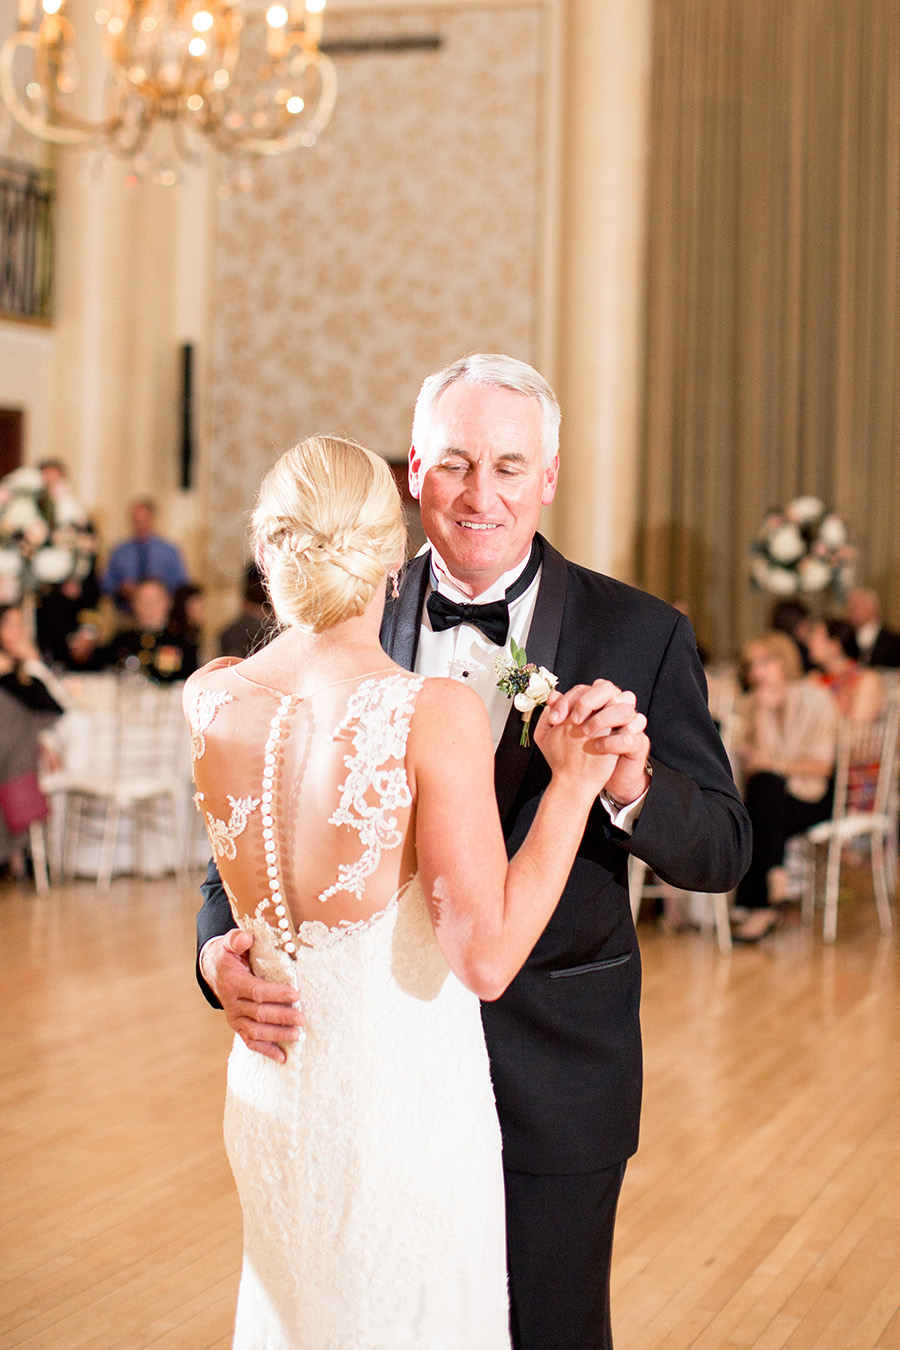 dupont country club wedding where bride dances with her dad in the ballroom 